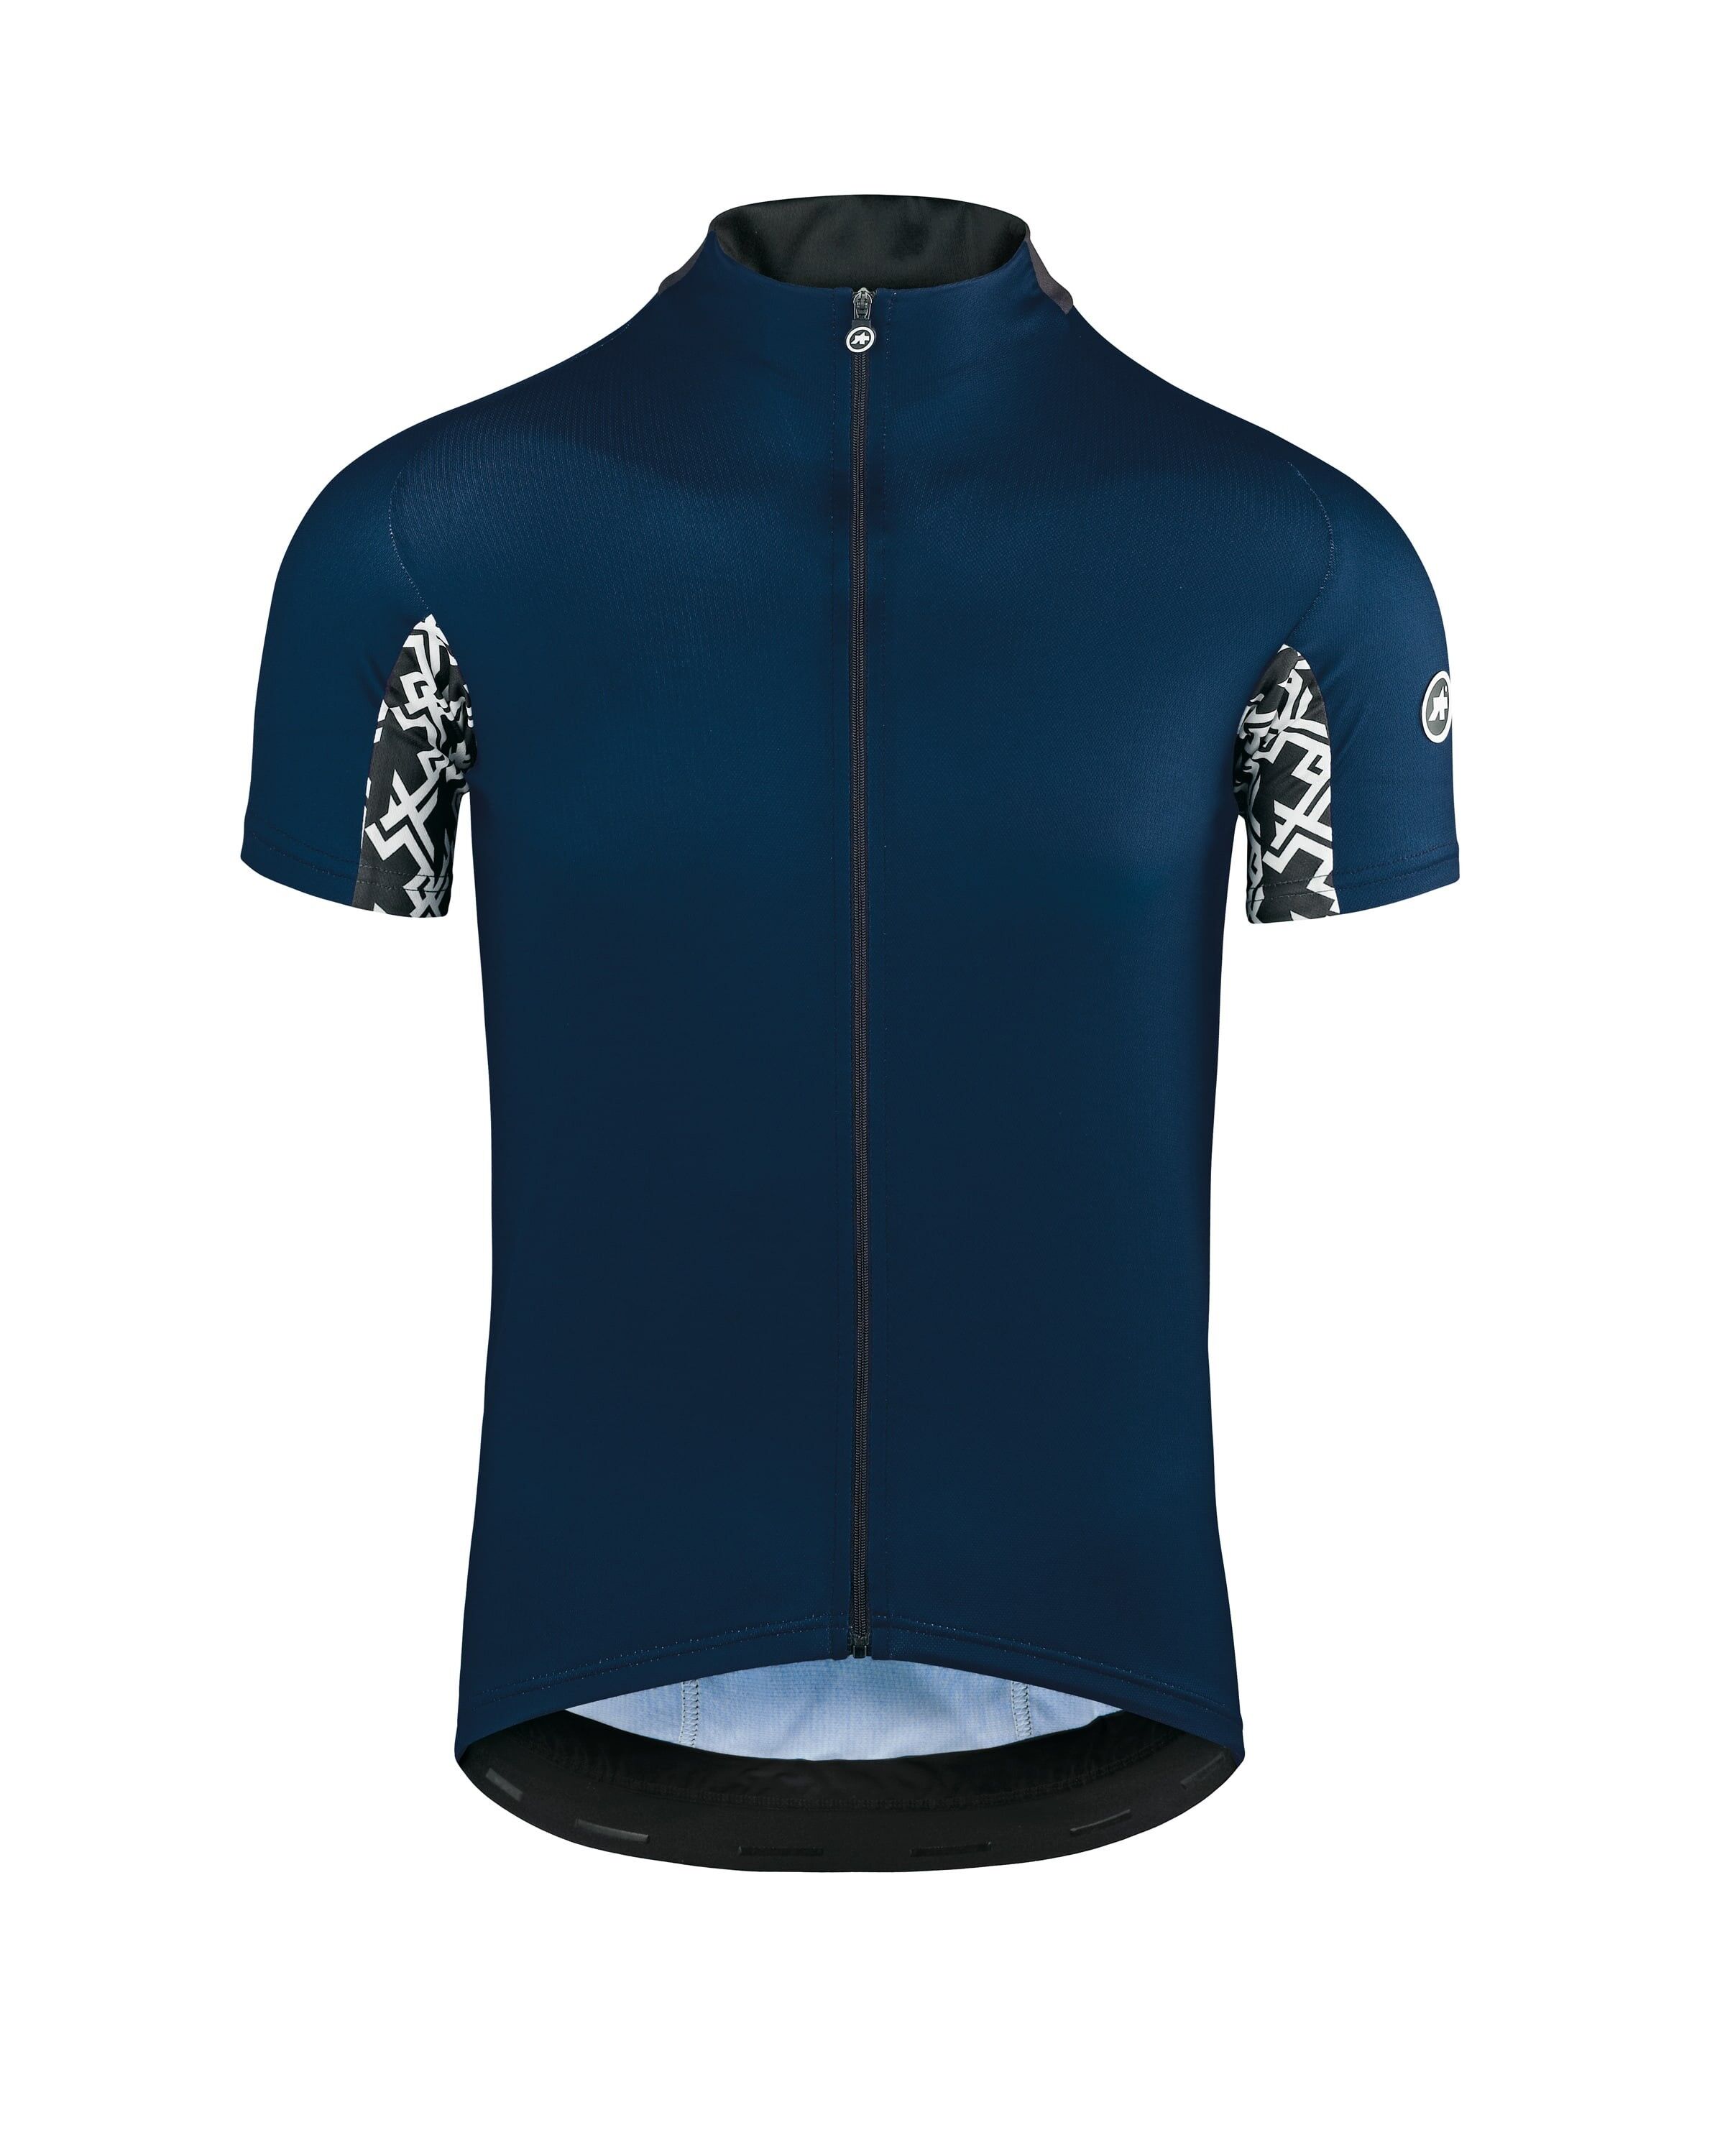 Assos Mille GT Short Sleeve Jersey - Maglia ciclismo - Uomo